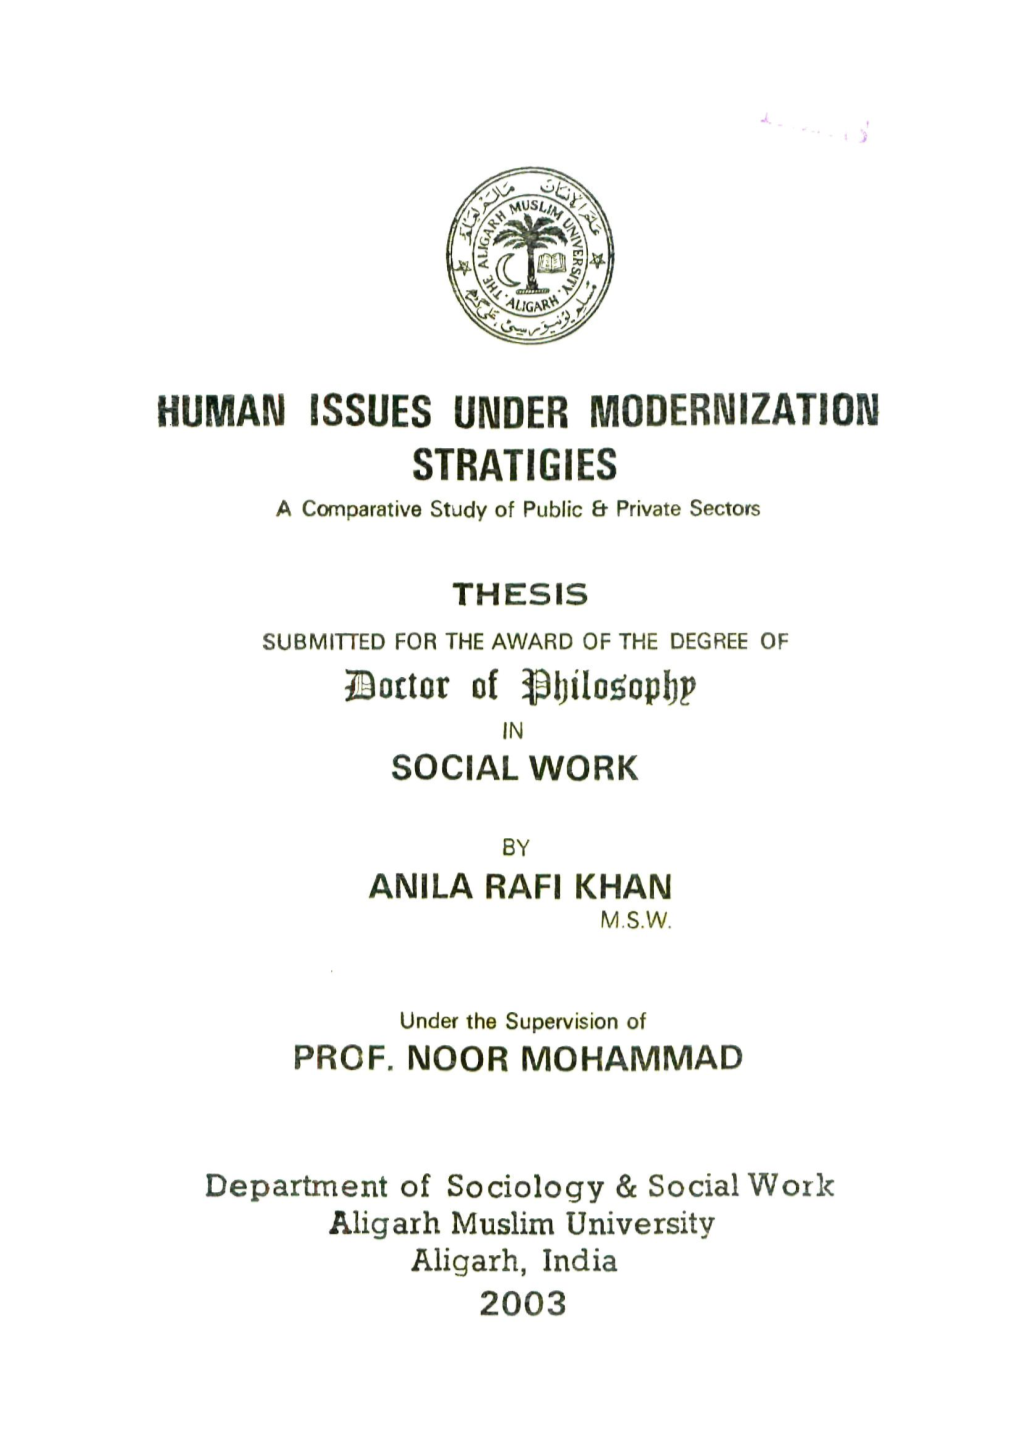 HUMAN ISSUES UNDER MODERNIZATION STRATIGIES a Comparative Study of Public & Private Sectors